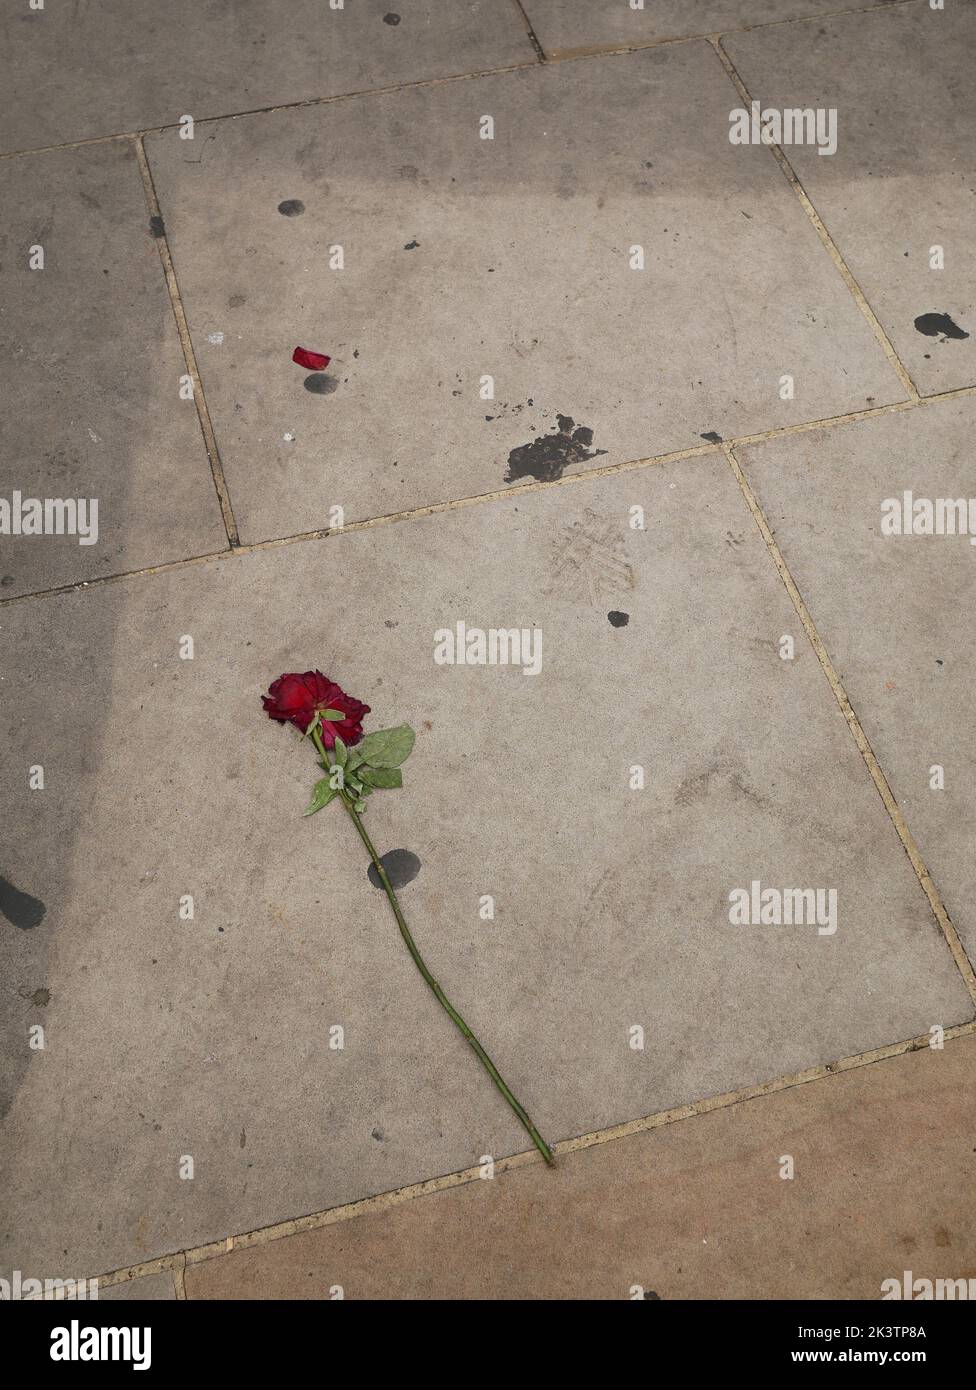 A single red rose abandoned on a street pavement. Stock Photo